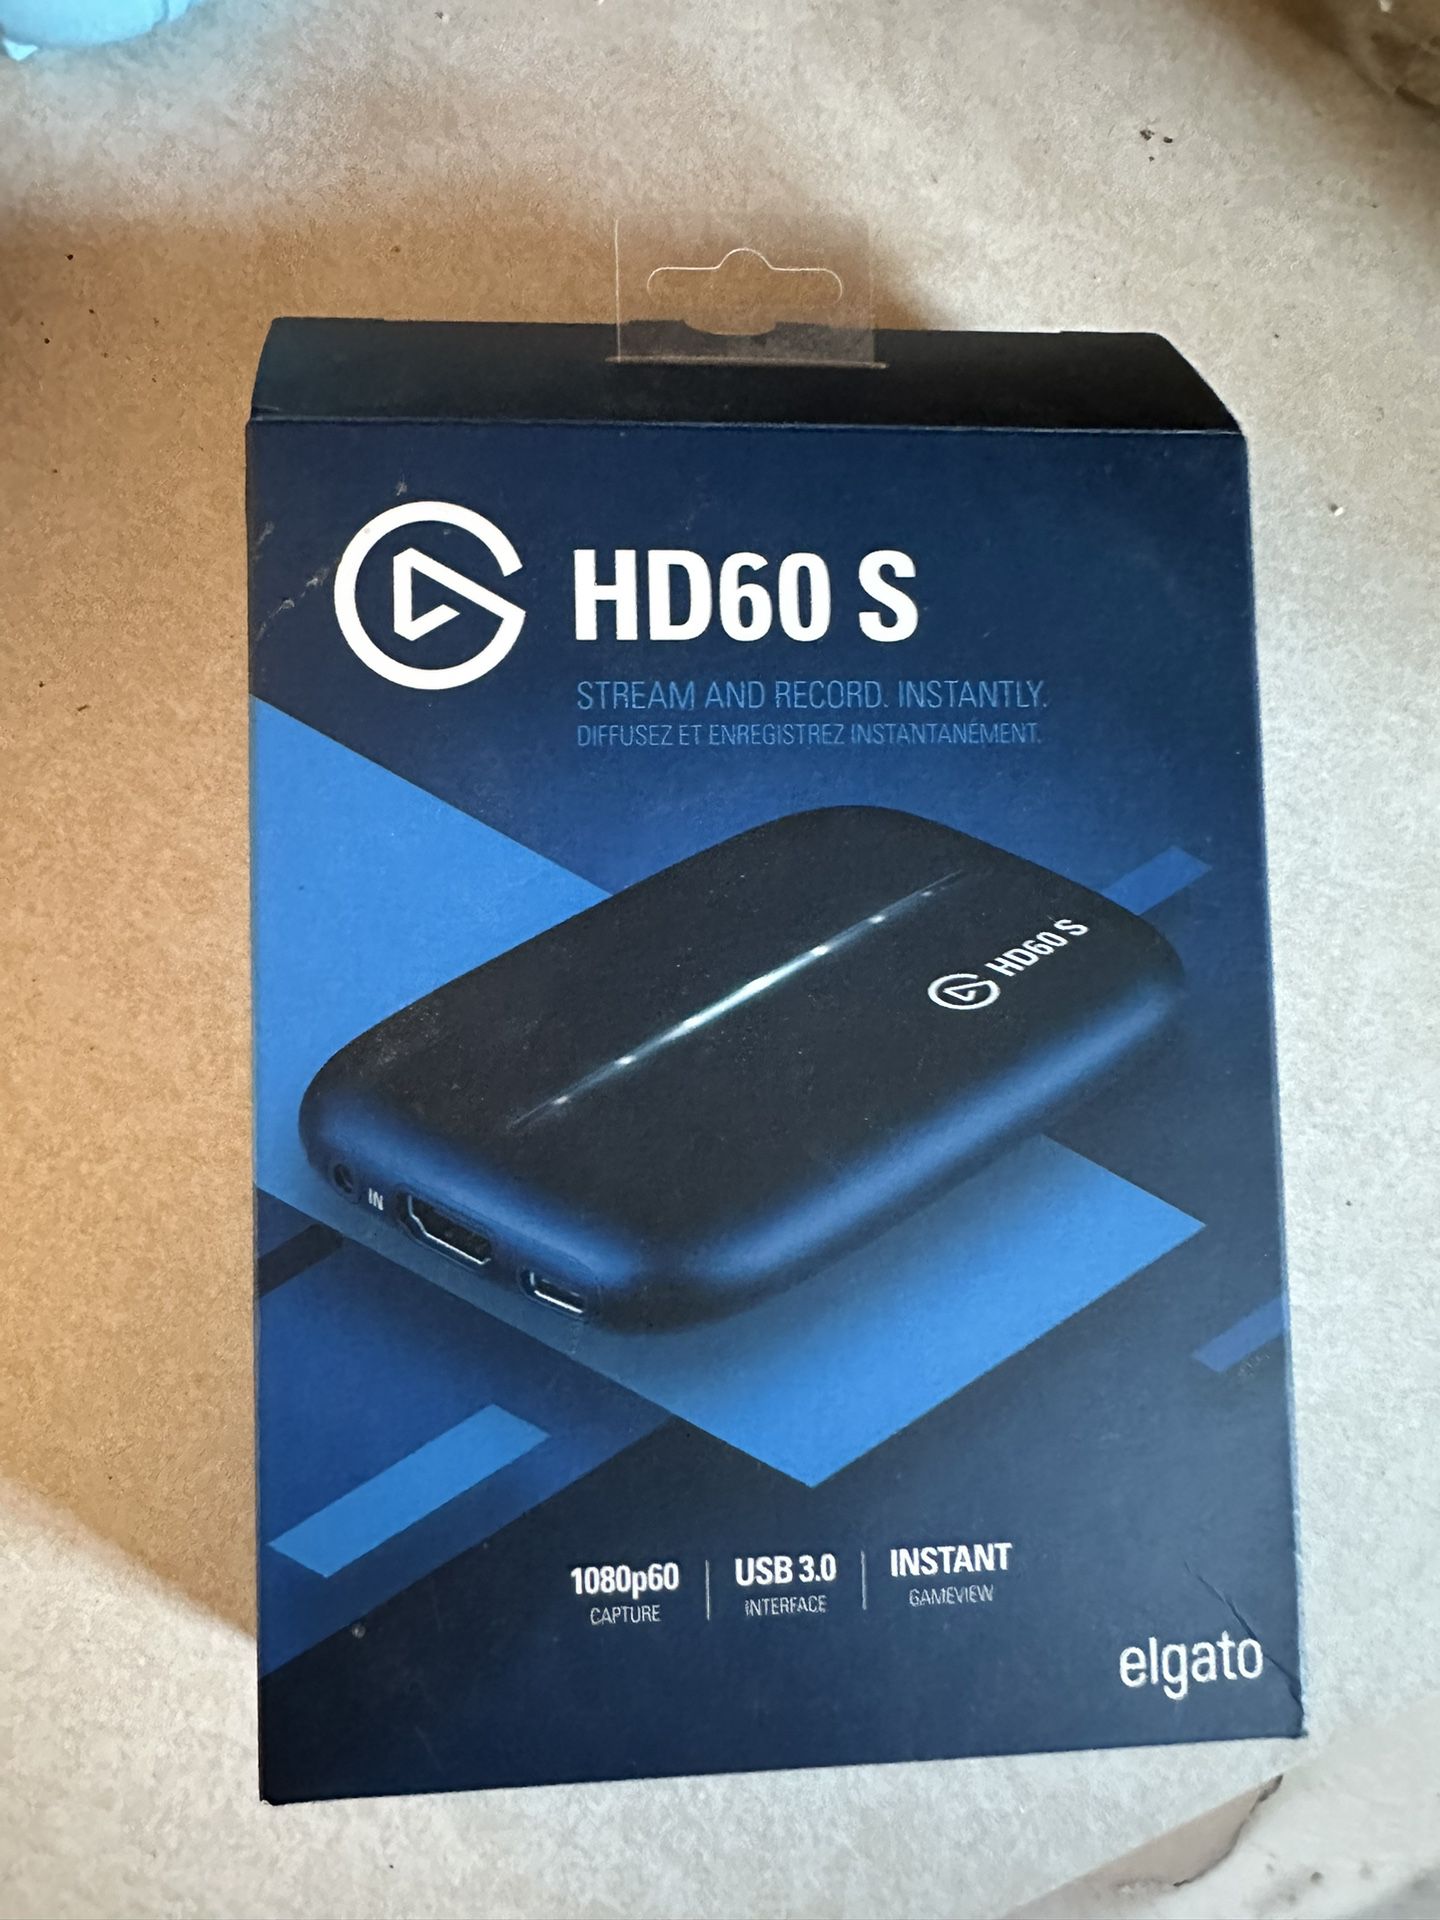 Elgato HD60 S, usb3.0 External Capture Card, Stream and Record in 1080p60 with ultra-low latency on PS5, PS4/Pro, Xbox Series X/S, Xbox One X/S, in OB